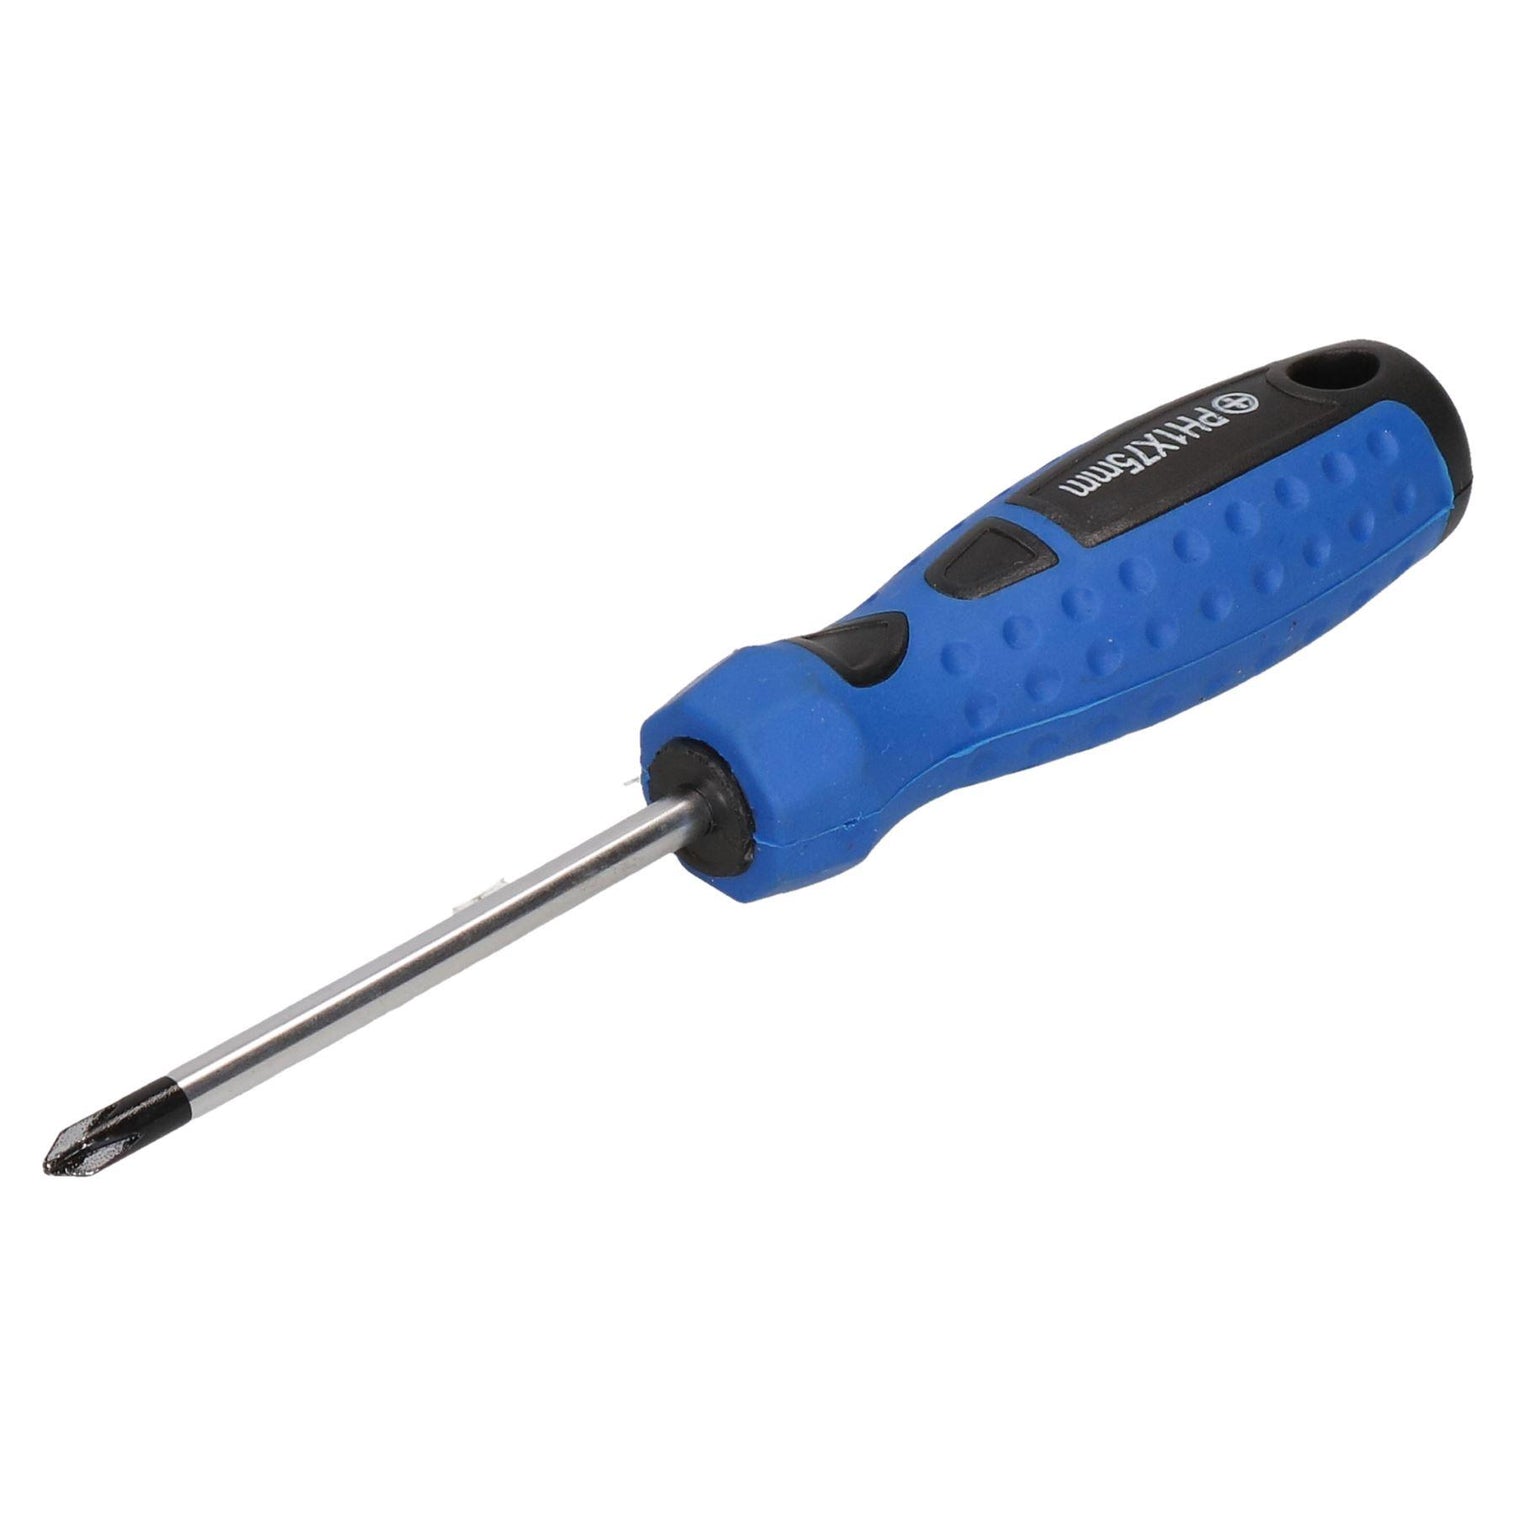 Phillips PH Screwdriver with Magnetic Tip Rubber Handle PH1 + PH2